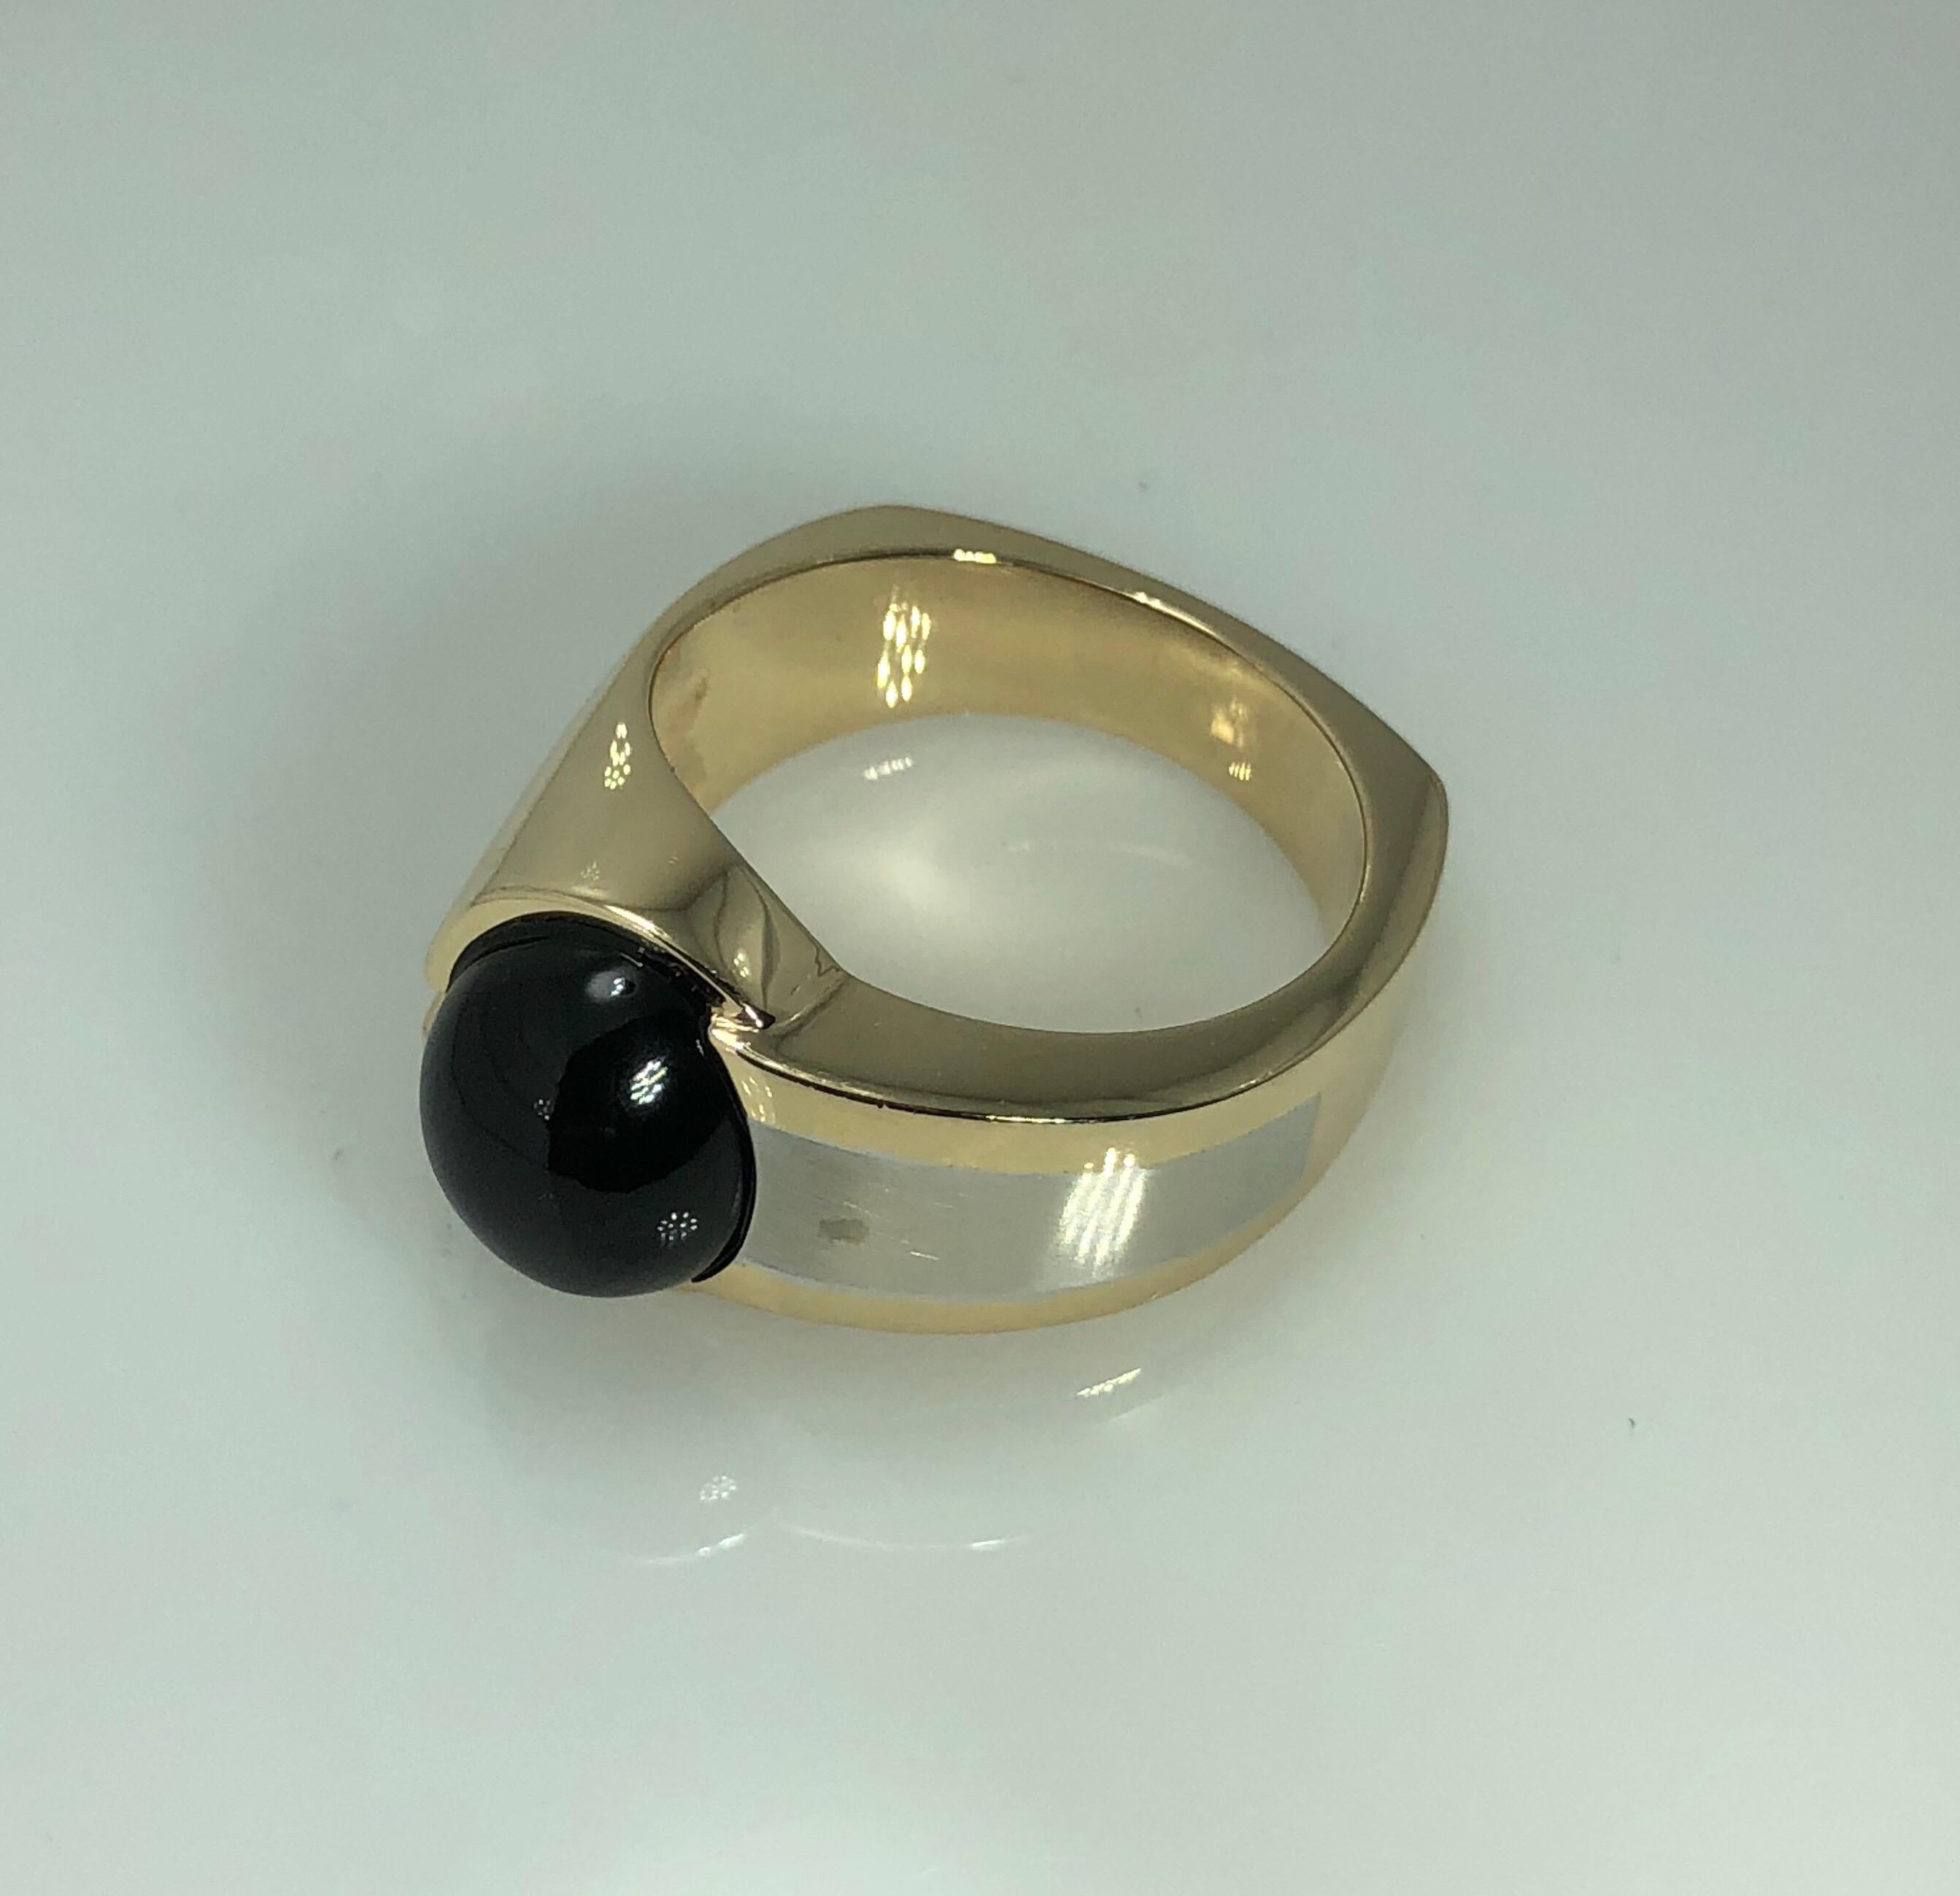 Mens 14 Karat white and Yellow Gold Onyx Contemporary Ring. This Mens ring is created in 14 karat white and yellow gold and weighs 17.3 grams. This piece is adorned with a cabochon cut oval 12mm by 10 mm black onyx. Finger size  This piece can be